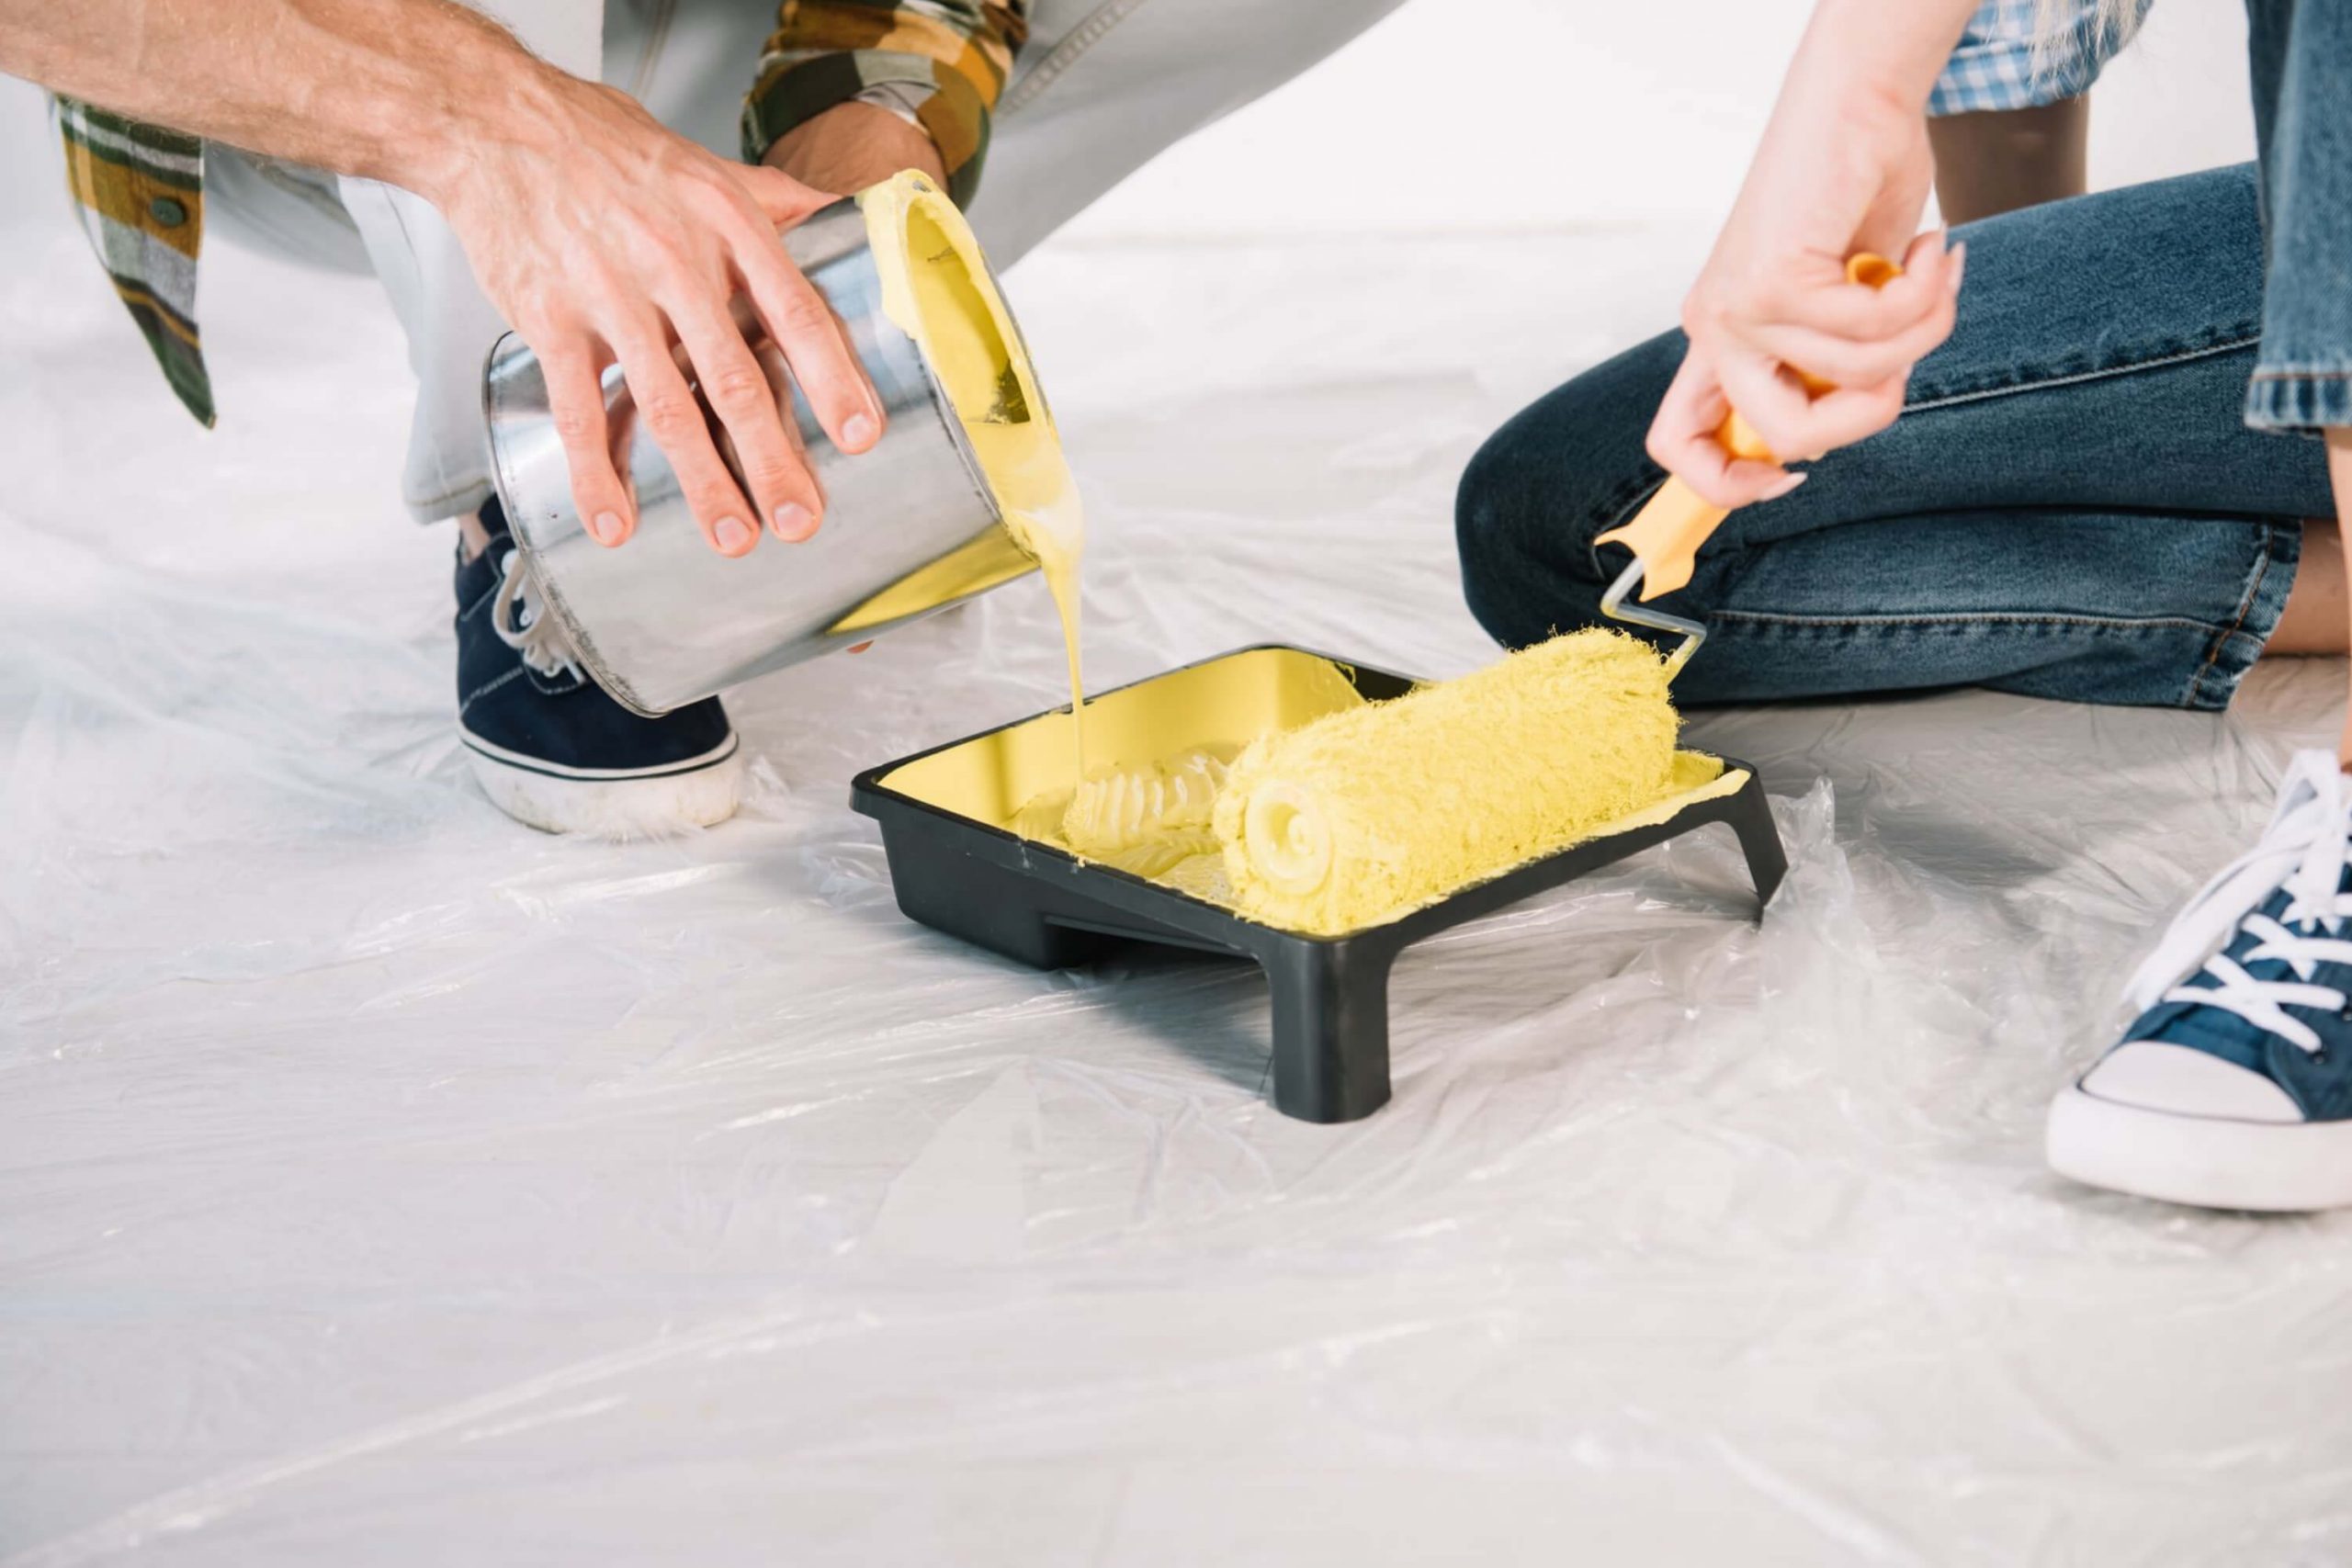 Extra Tips For Keeping You Safe While Painting